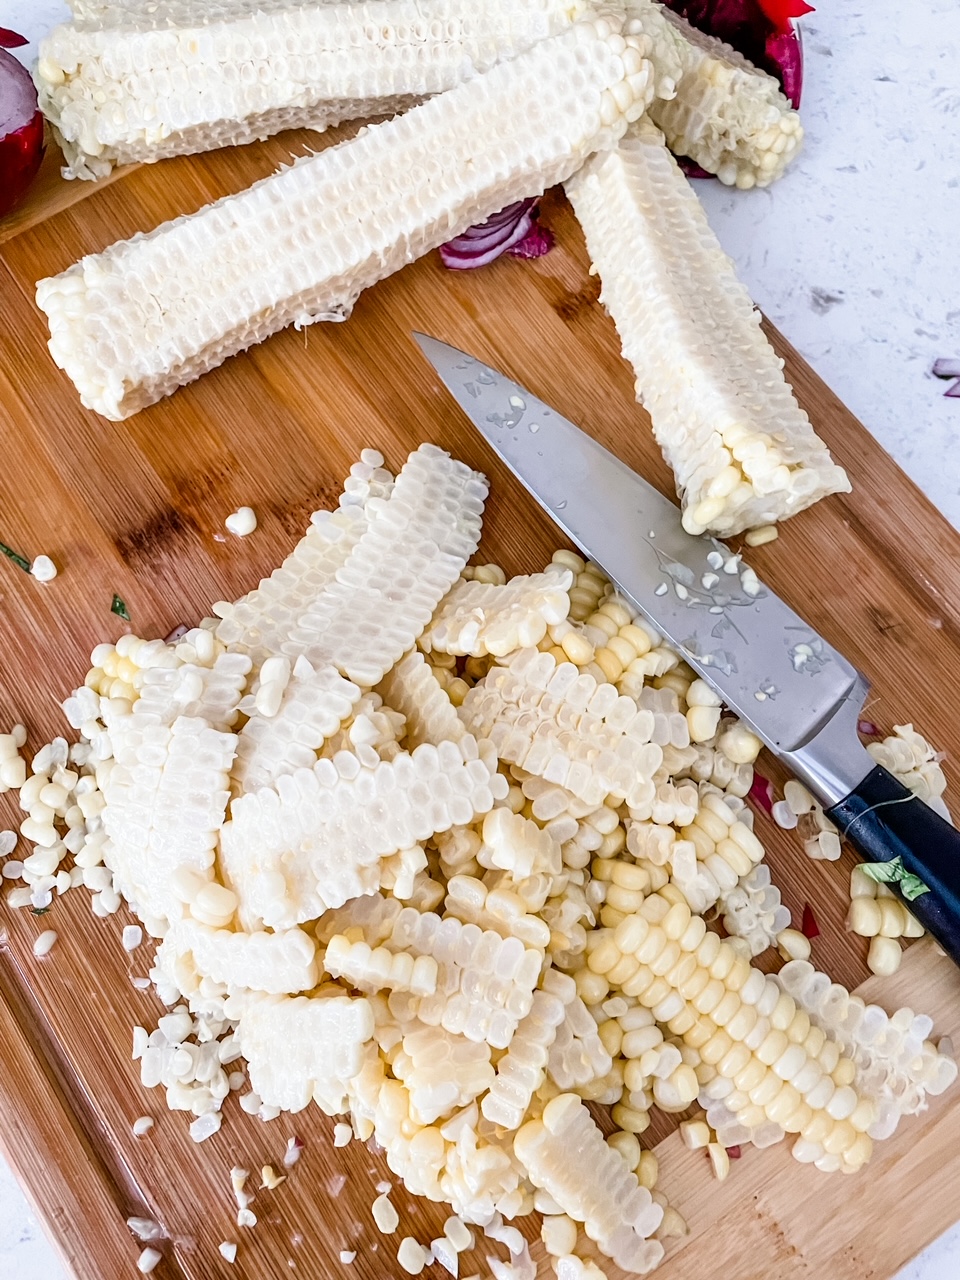 The shaved corn cobs on a cutting board